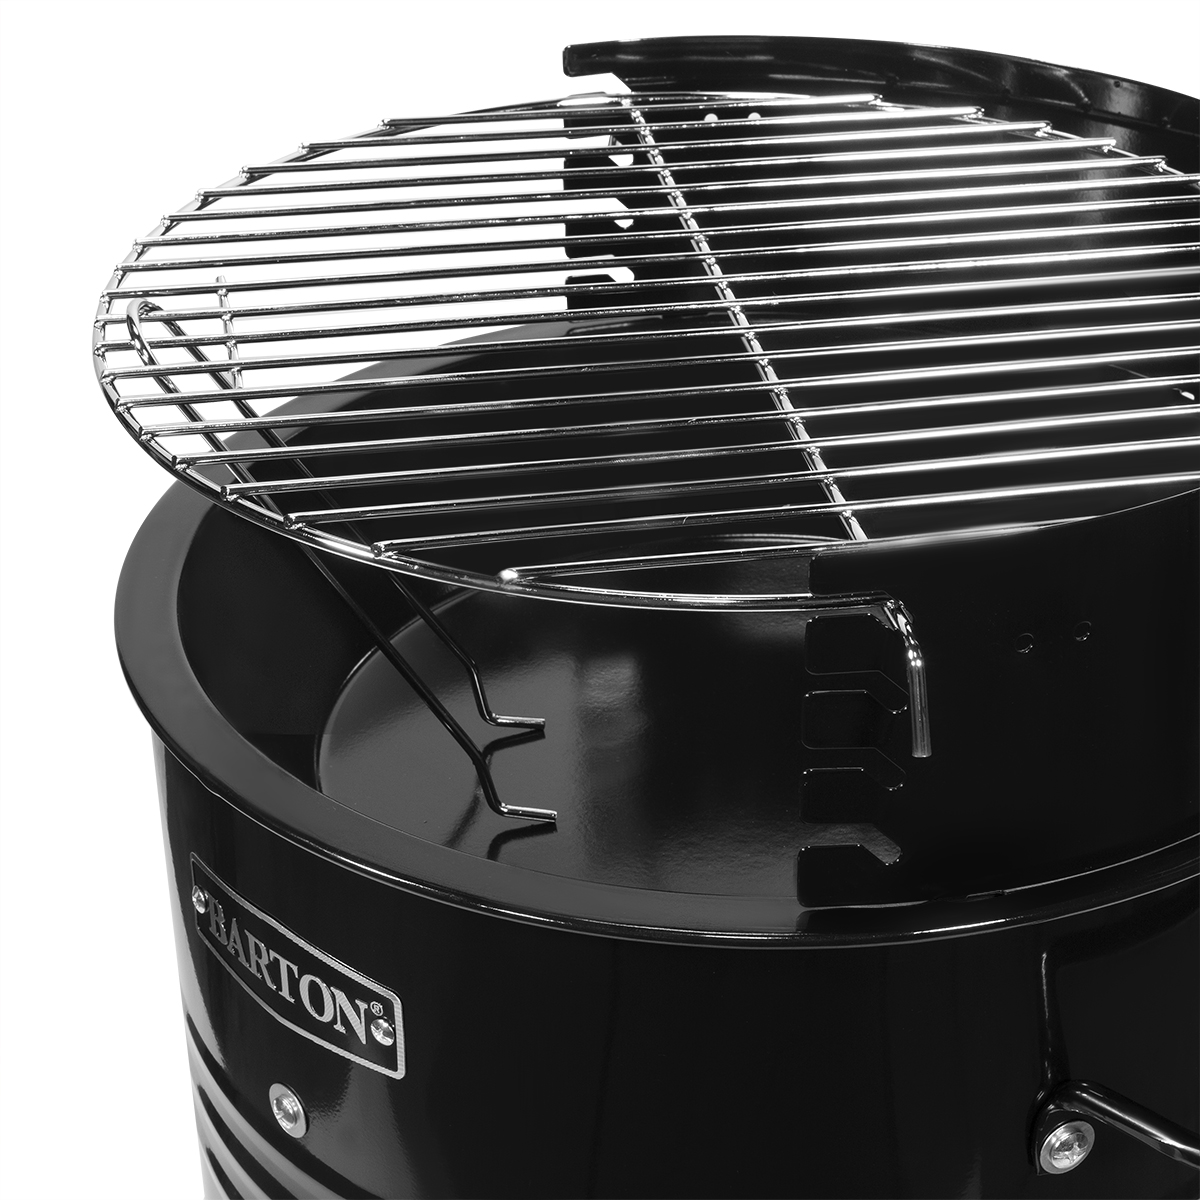 Barton Barrel Pit Charcoal Barbecue Smoker Grill BBQ, Pizza Oven, Table & Fire Pit Grilling -Black - image 5 of 7